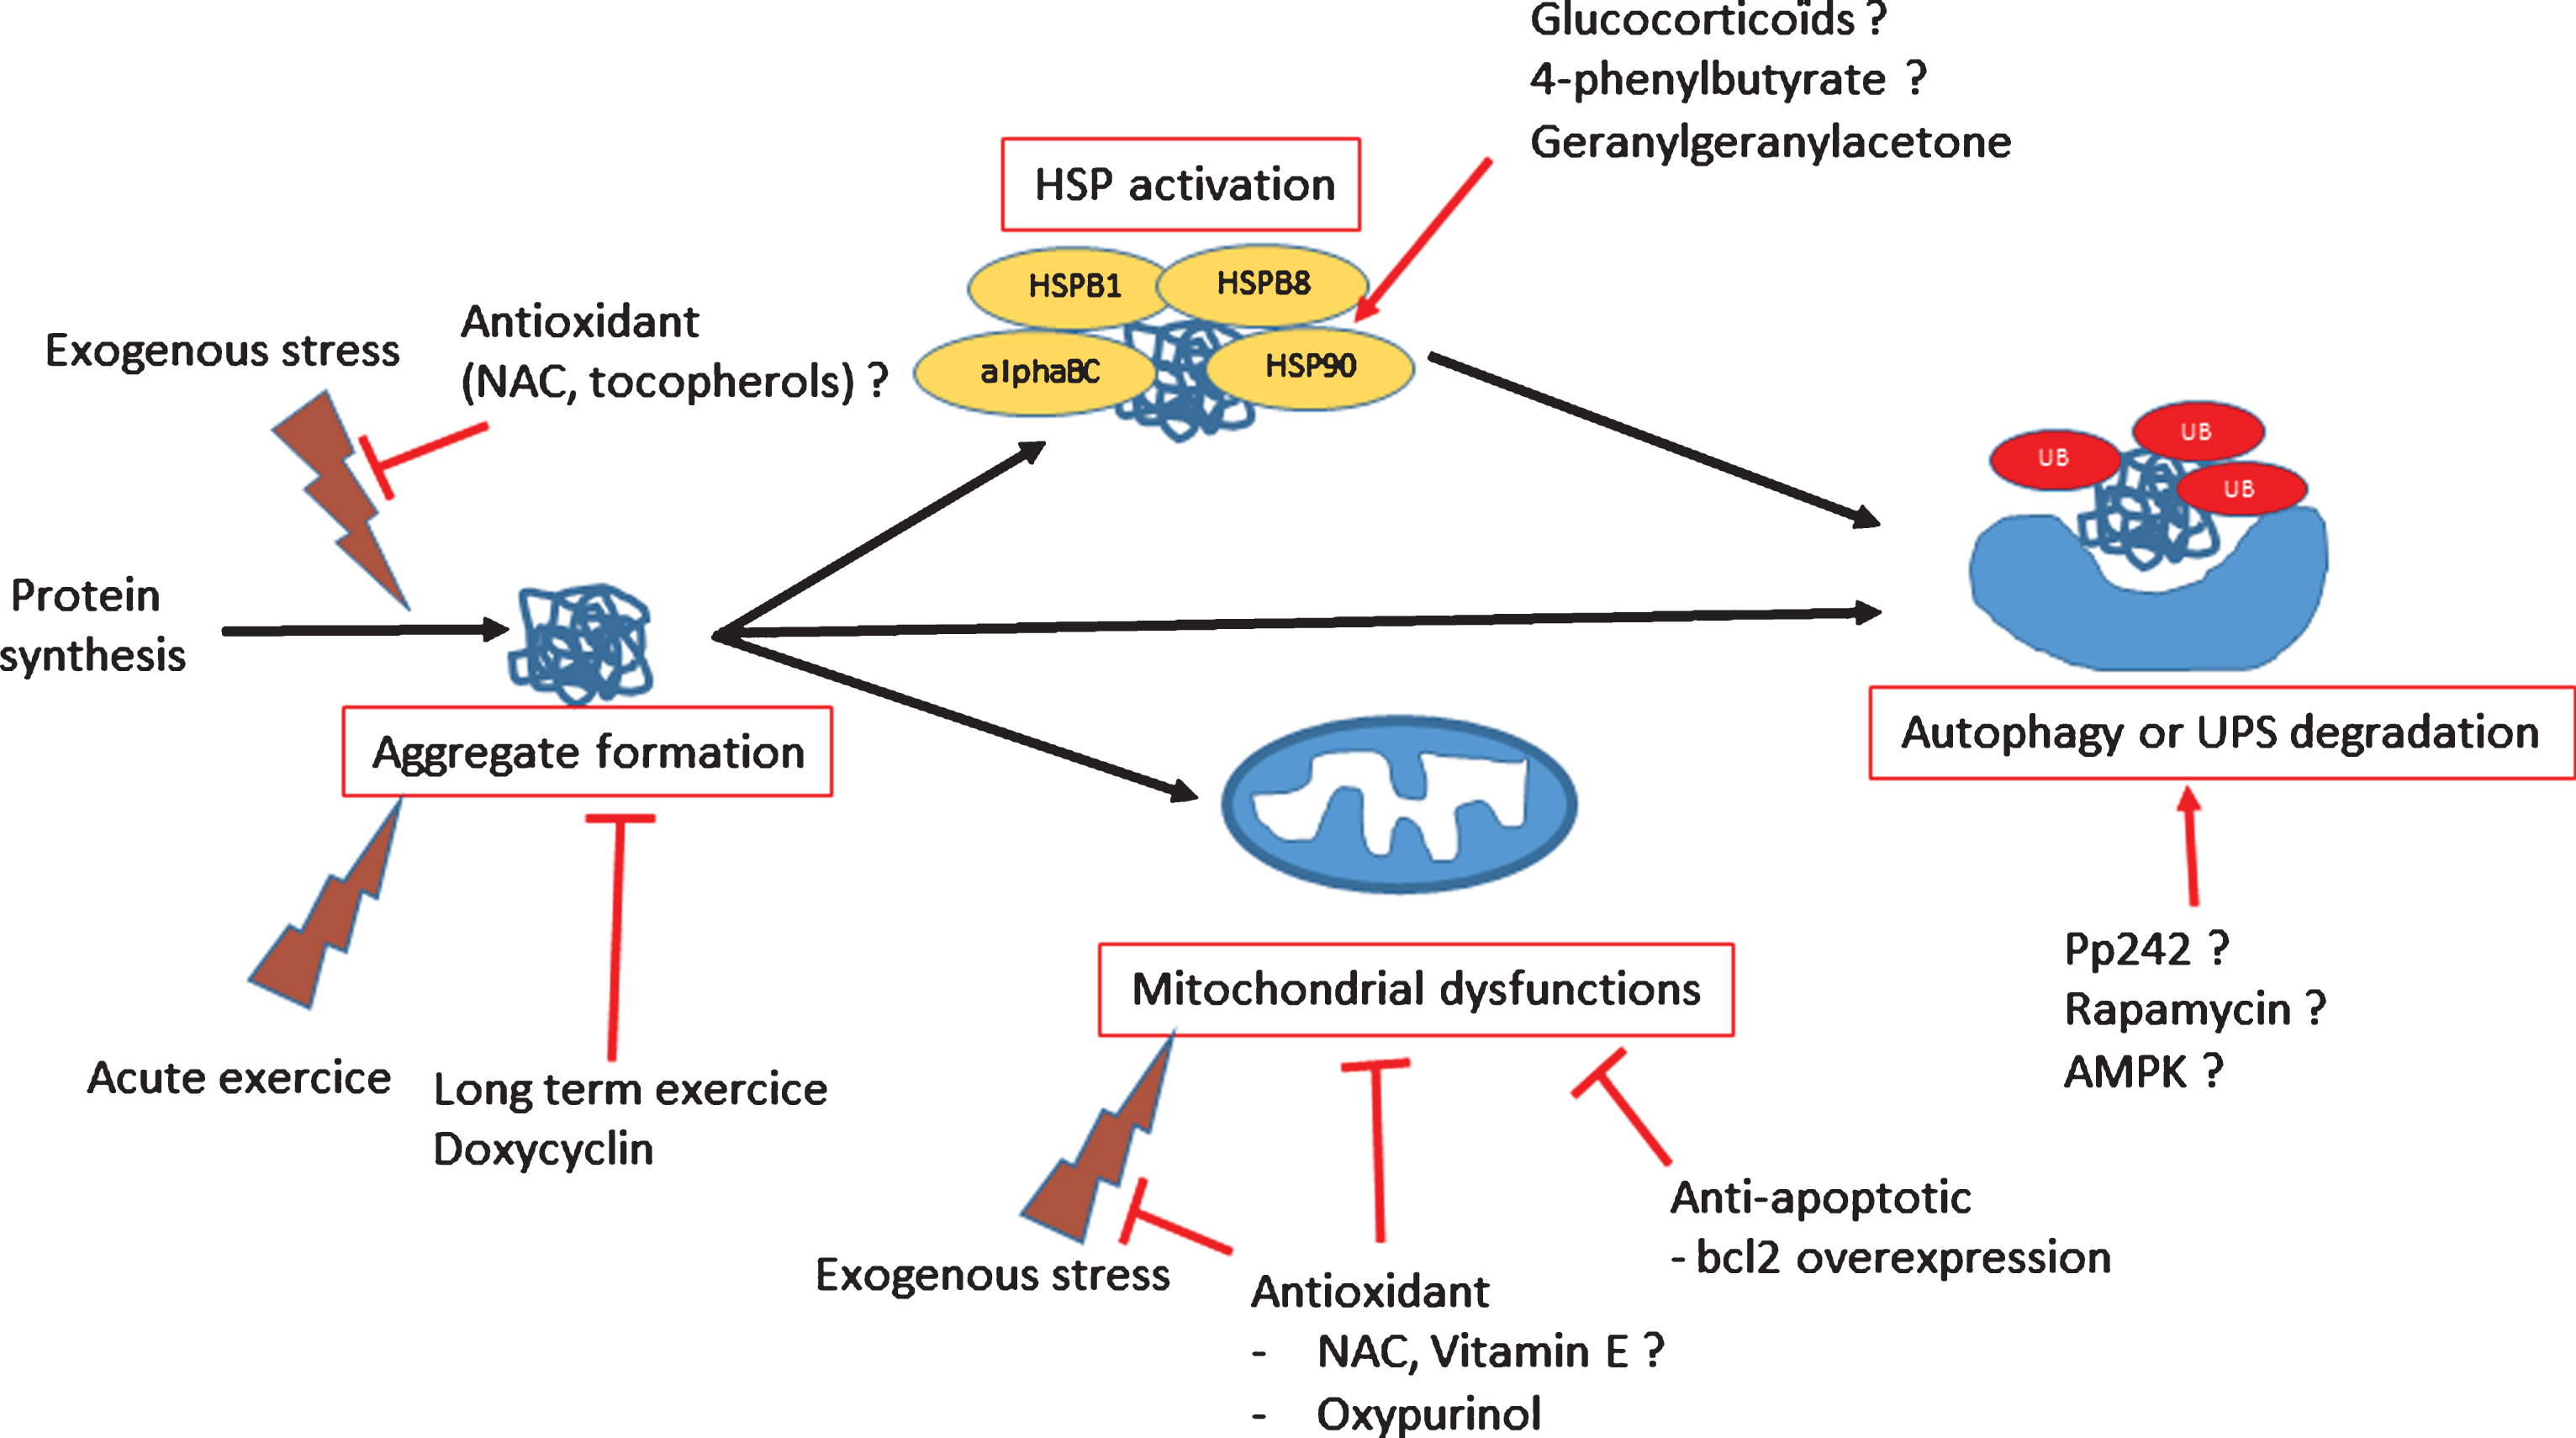 Scheme of dysregulated functions in myofibrillar myopathies and potential therapeutic treatments.